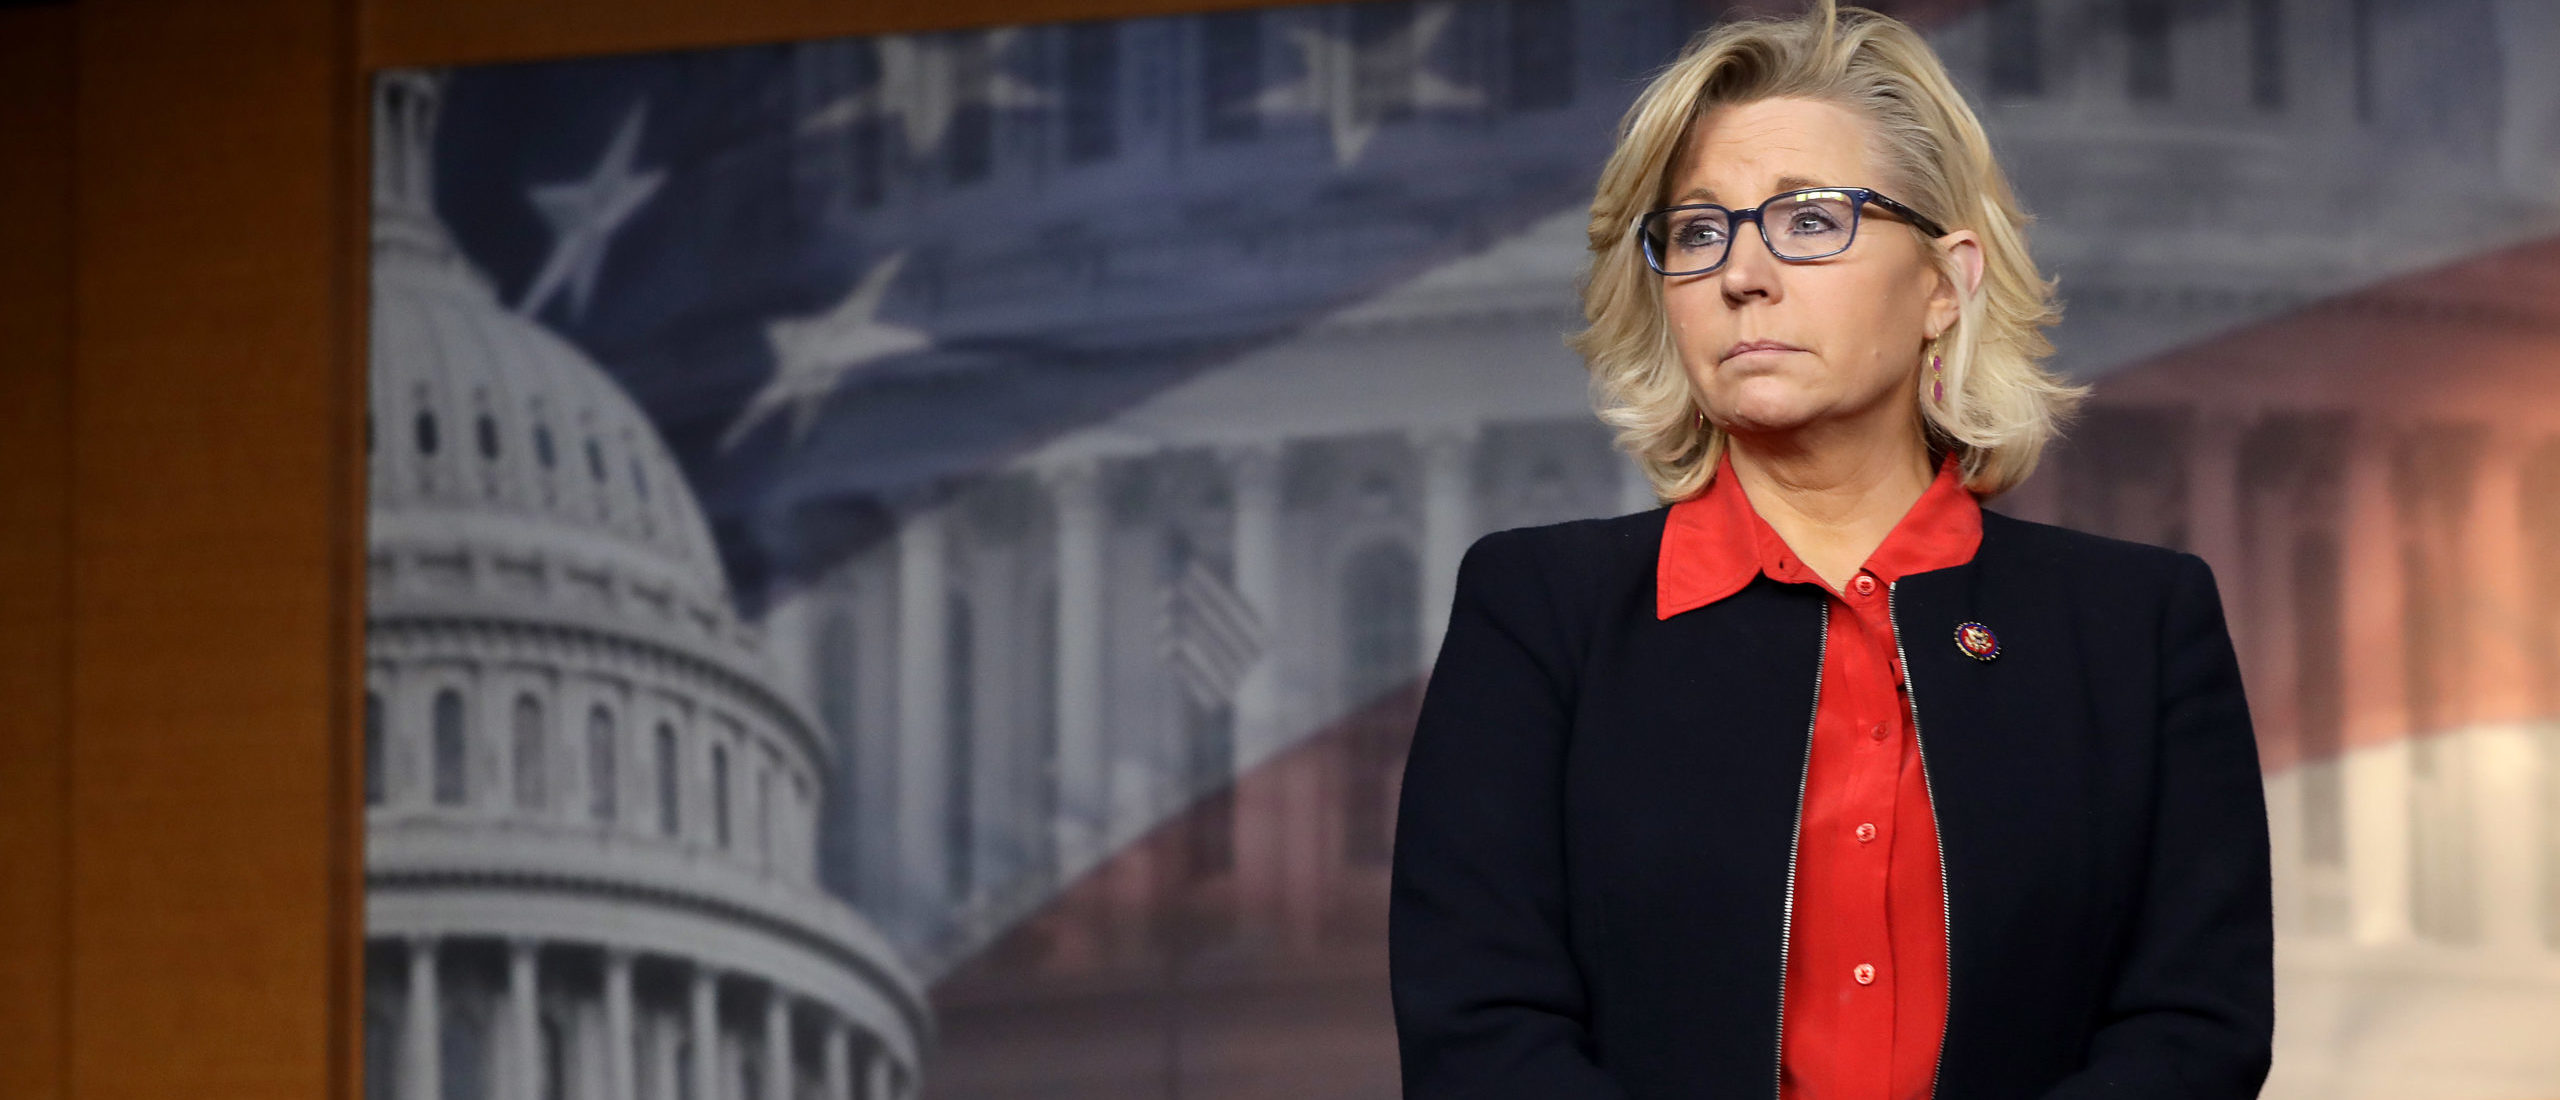 WASHINGTON, DC - FEBRUARY 13: House Republican Conference Chair Rep. Liz Cheney (R-WY) attends a news conference following a GOP caucus meeting at the U.S. Capitol Visitors Center February 13, 2019 in Washington, DC. House Minority Leader Kevin McCarthy (R-CA) said that he supports the framework of a bipartisan spending deal that would avert another partial federal government shutdown but is waiting to read the bill before deciding on whether he would vote for it. (Photo by Chip Somodevilla/Getty Images)